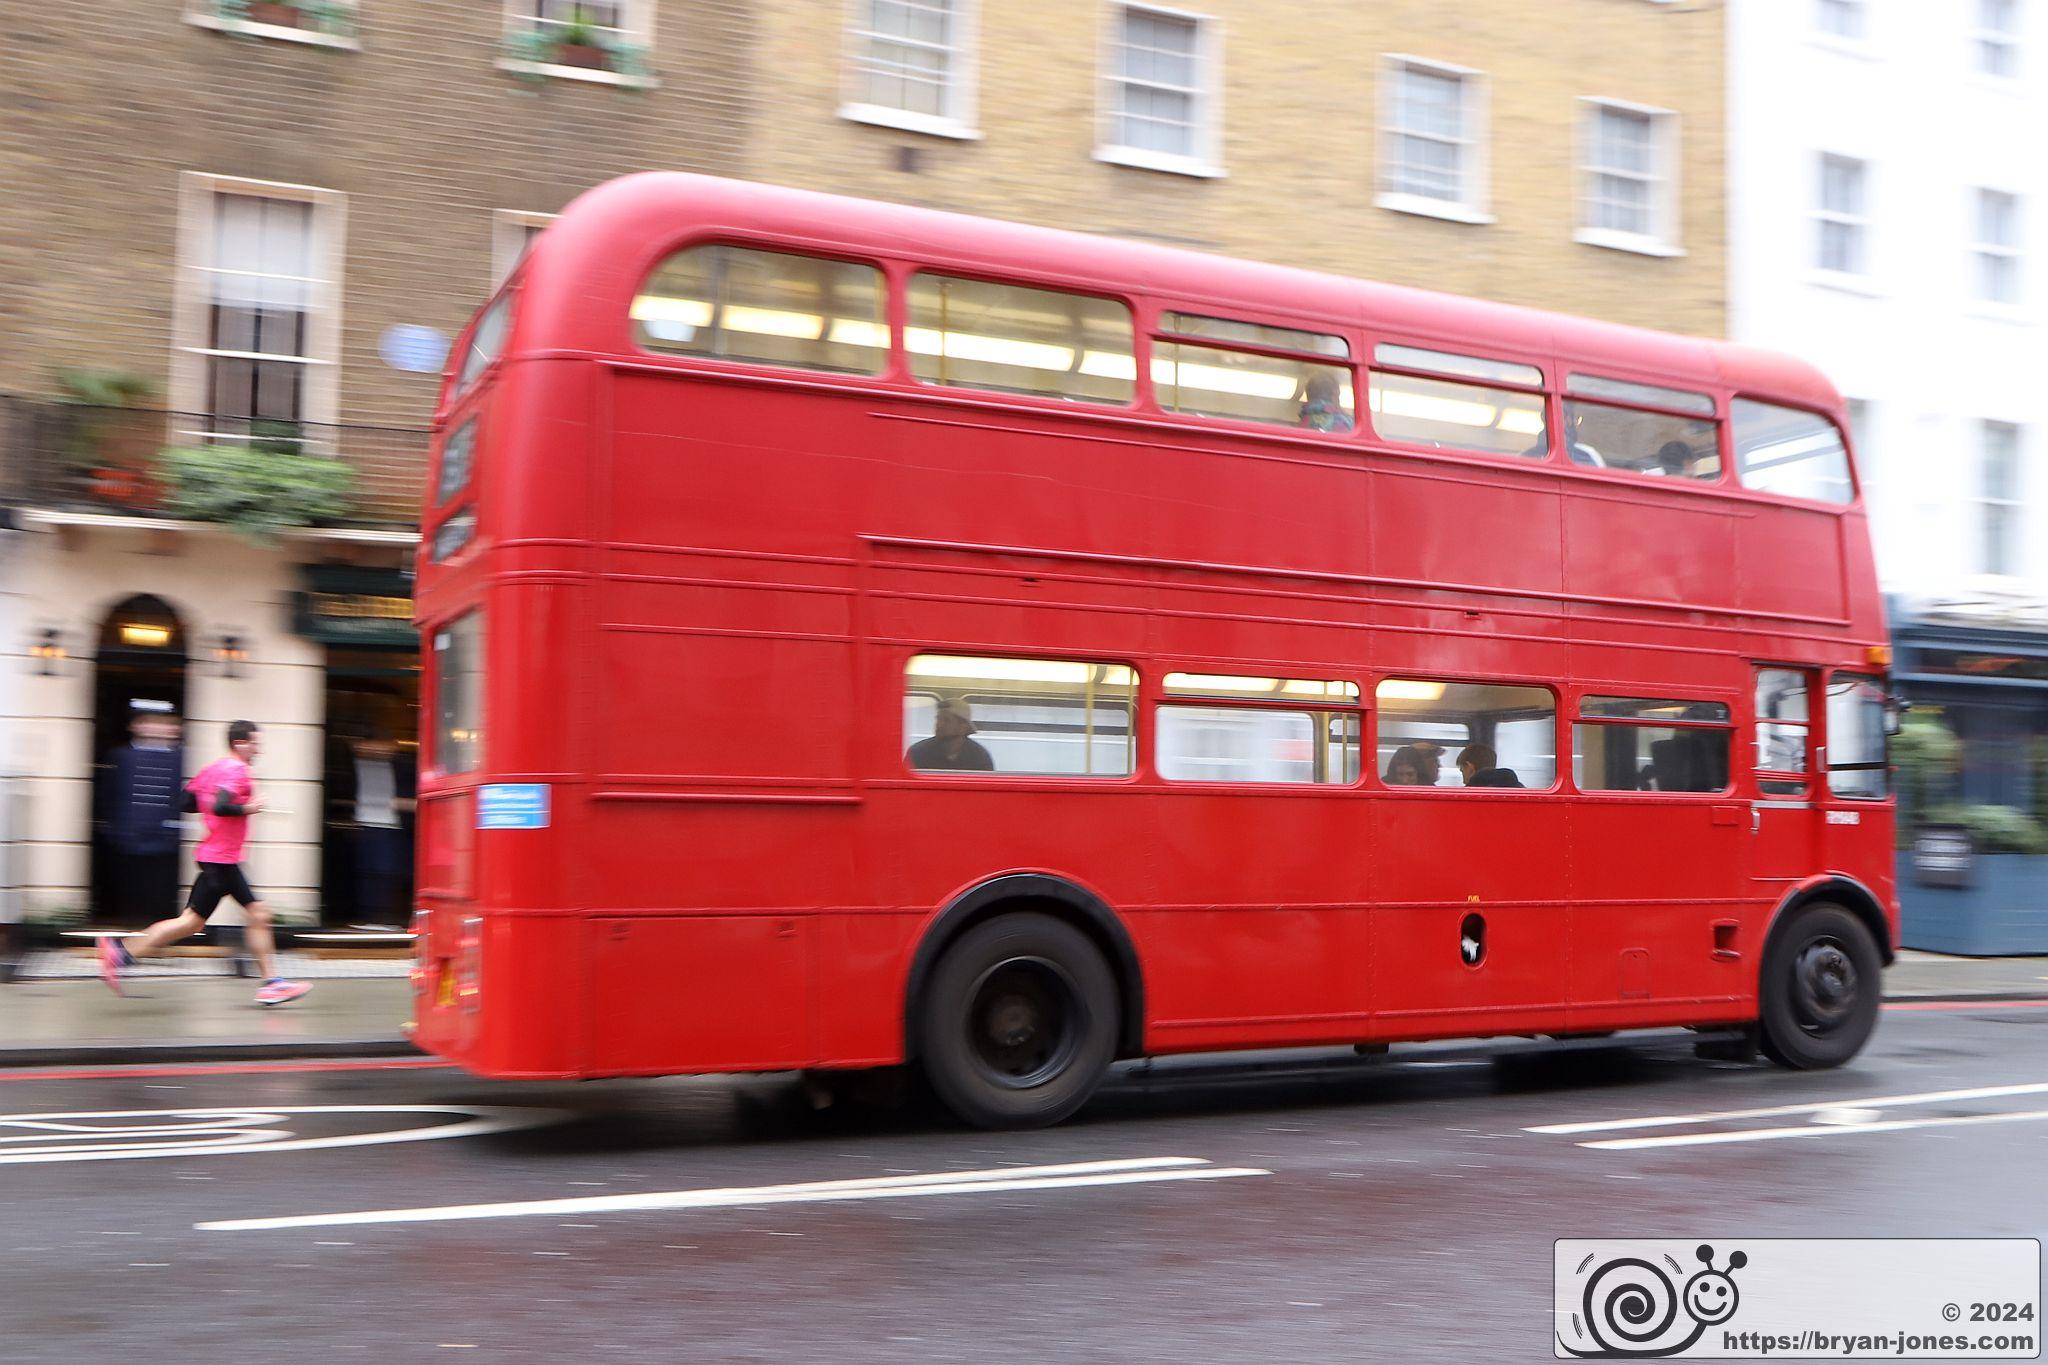 Routemaster RM848 WLT848. Vintage preserved London double decker Routemaster bus in Baker Street, London running a service on 10-Mar-2024. Passing the Shelock Holmes Museum.